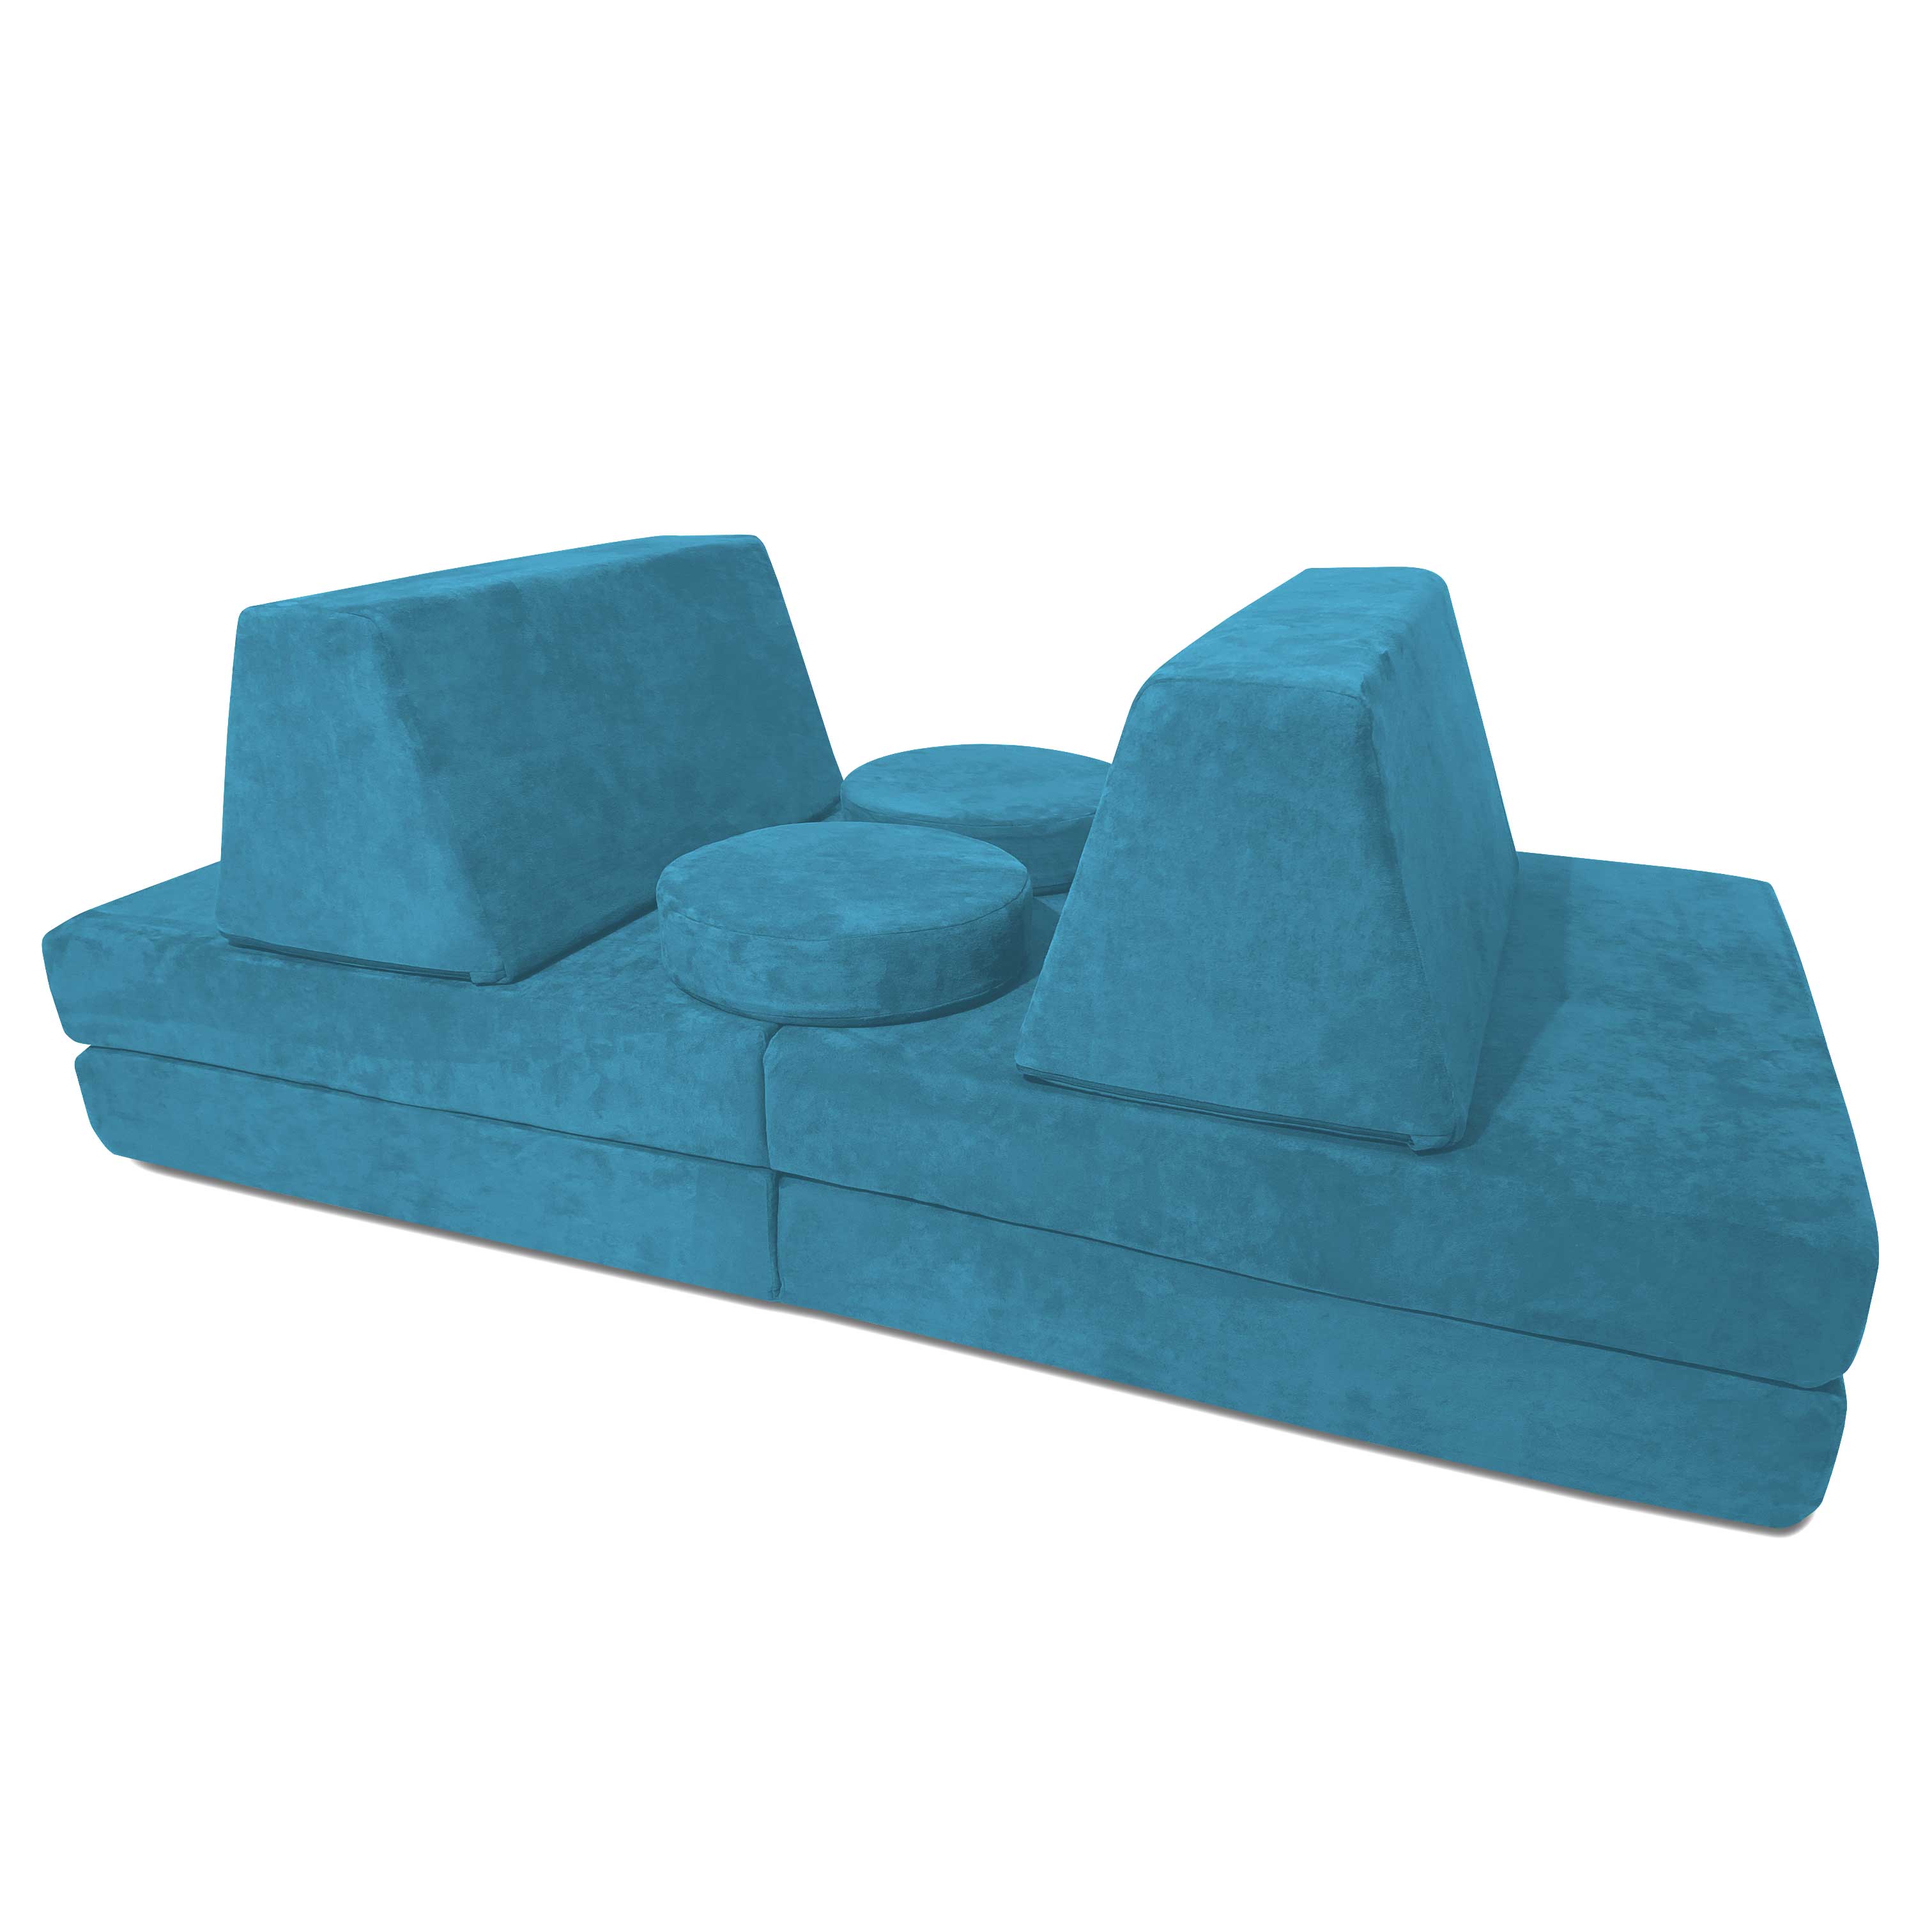 Mod Blox 10 Piece Soft Furniture Playset Modular Microsuede Foam Play Couch for Creative Kids